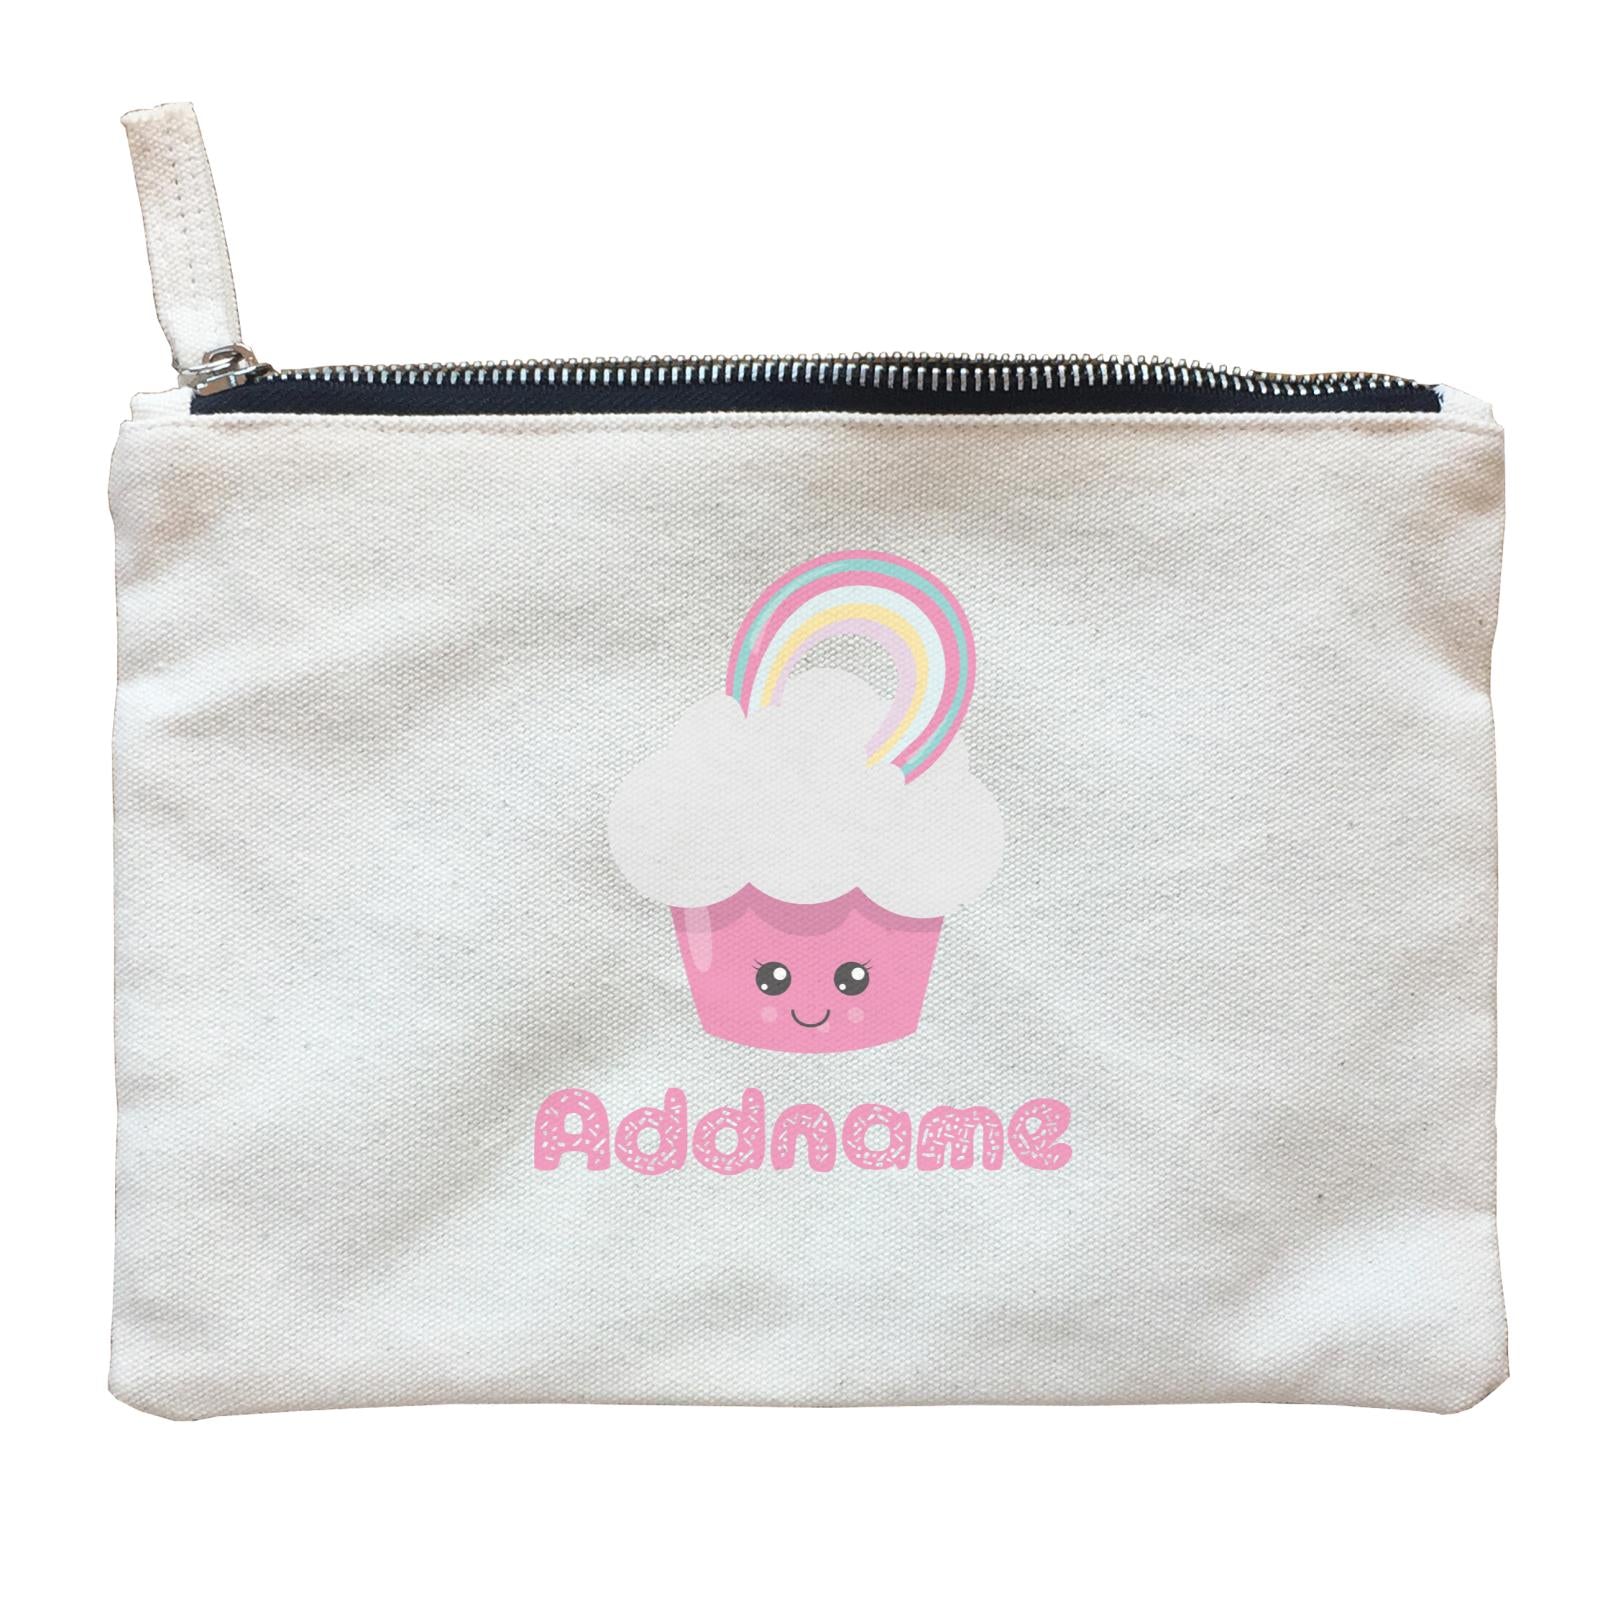 Magical Sweets Pink Cupcake with Rainbow Addname Zipper Pouch